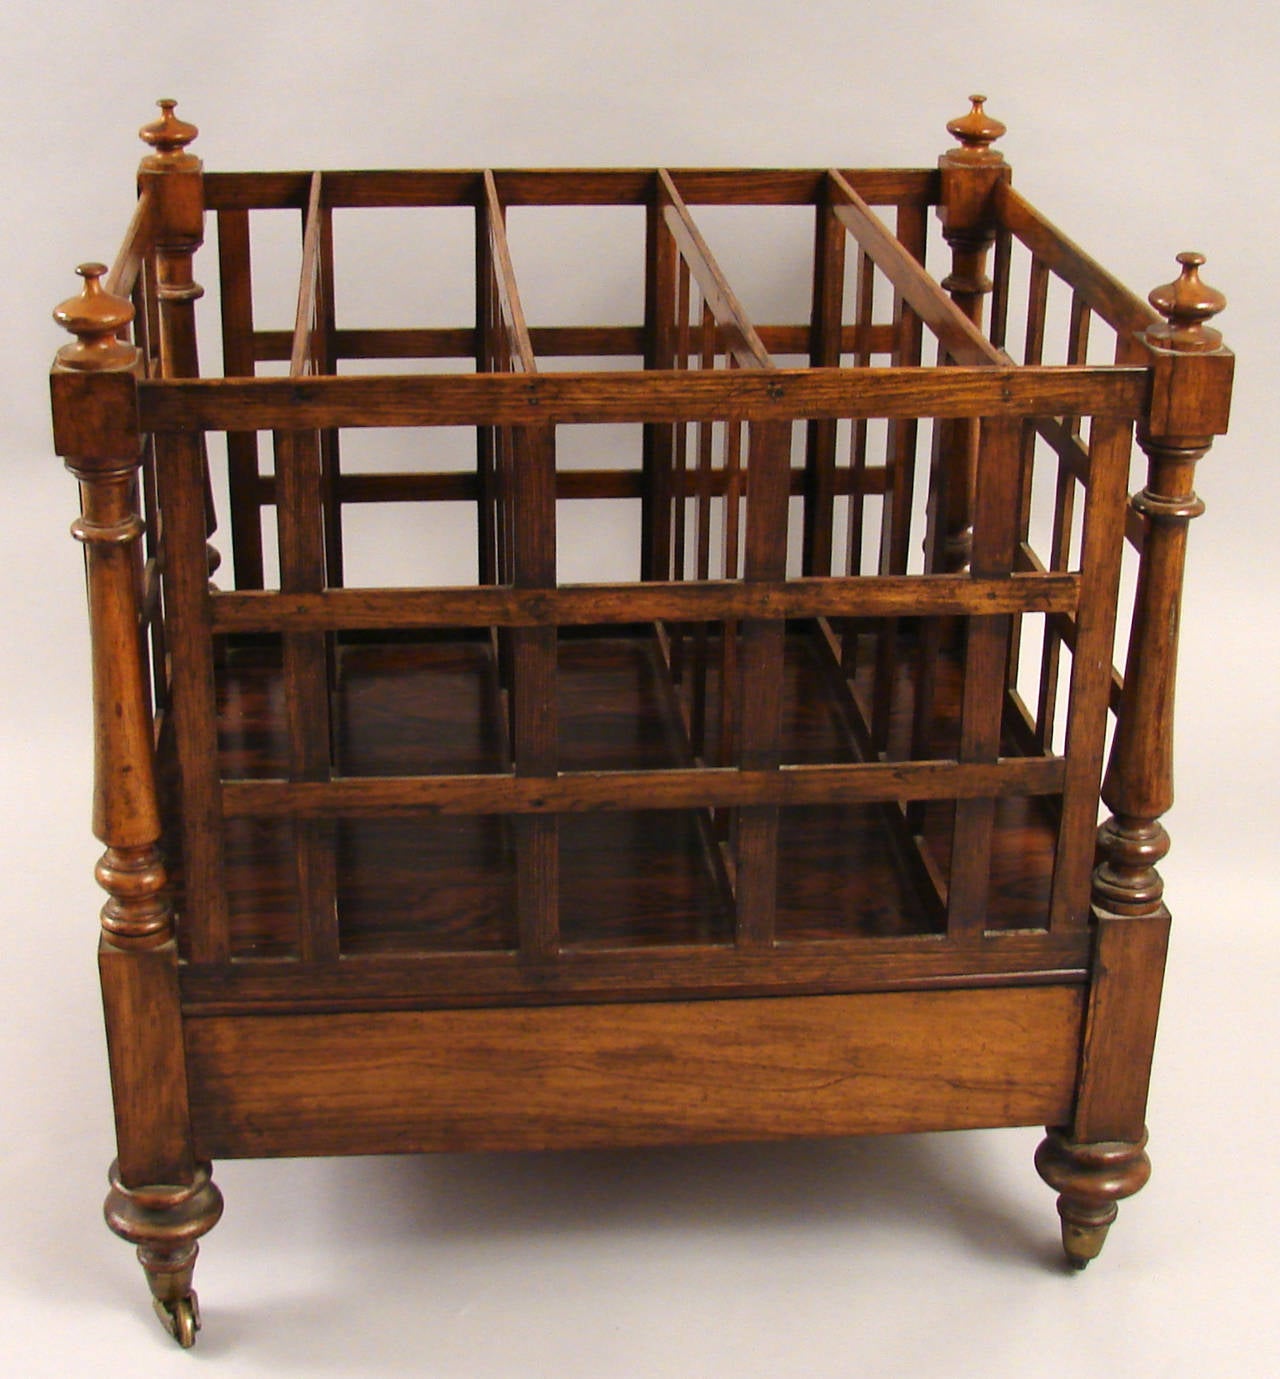 A large-scale Regency rosewood Canterbury having five flat-topped partitioned compartments with finial top corners rising on turned legs terminating on casters. One functional side drawer, circa 1820.